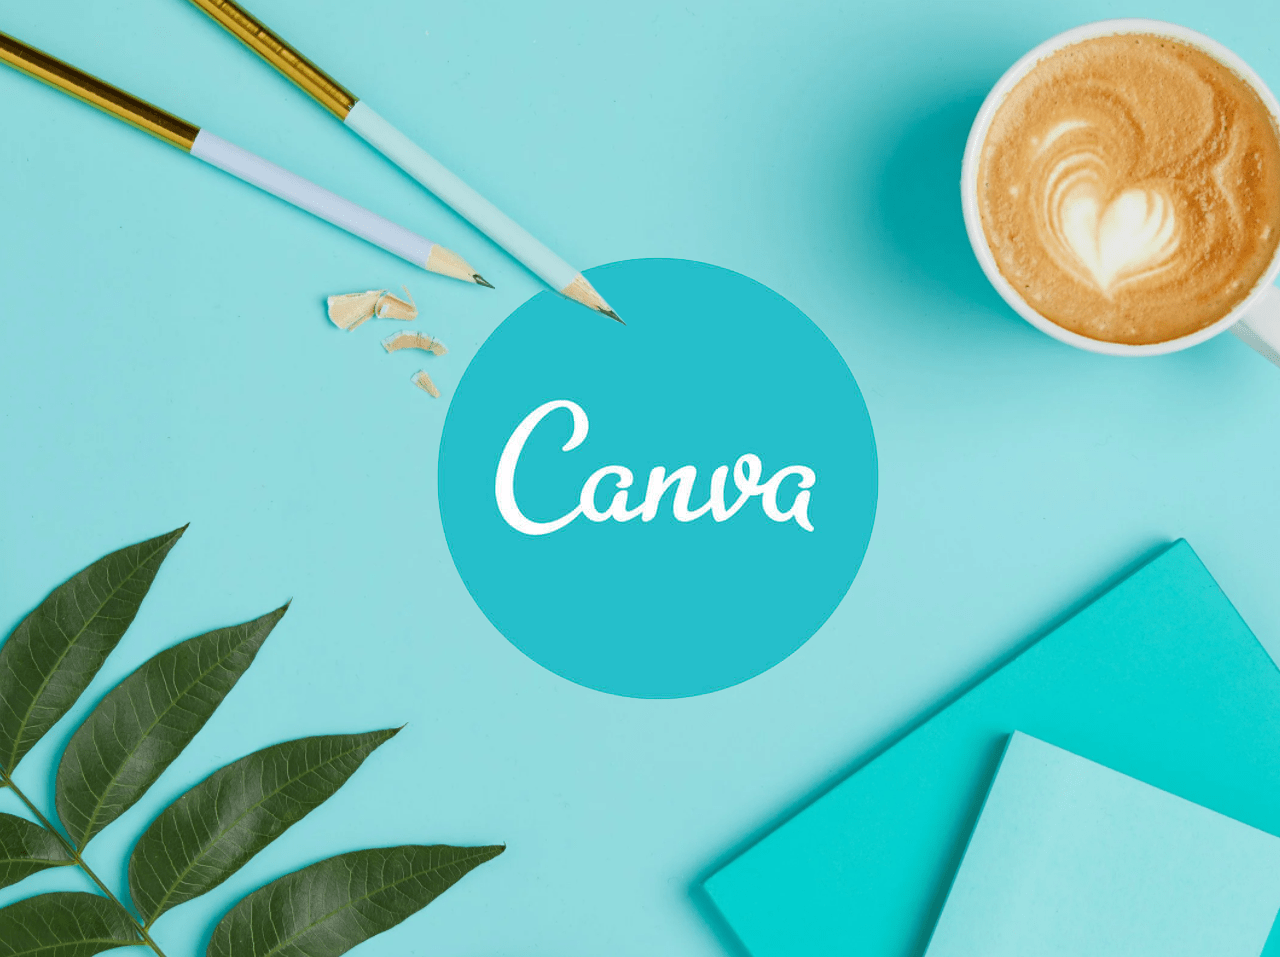 A Cup Of Coffee And A Notebook With The Word Canvas